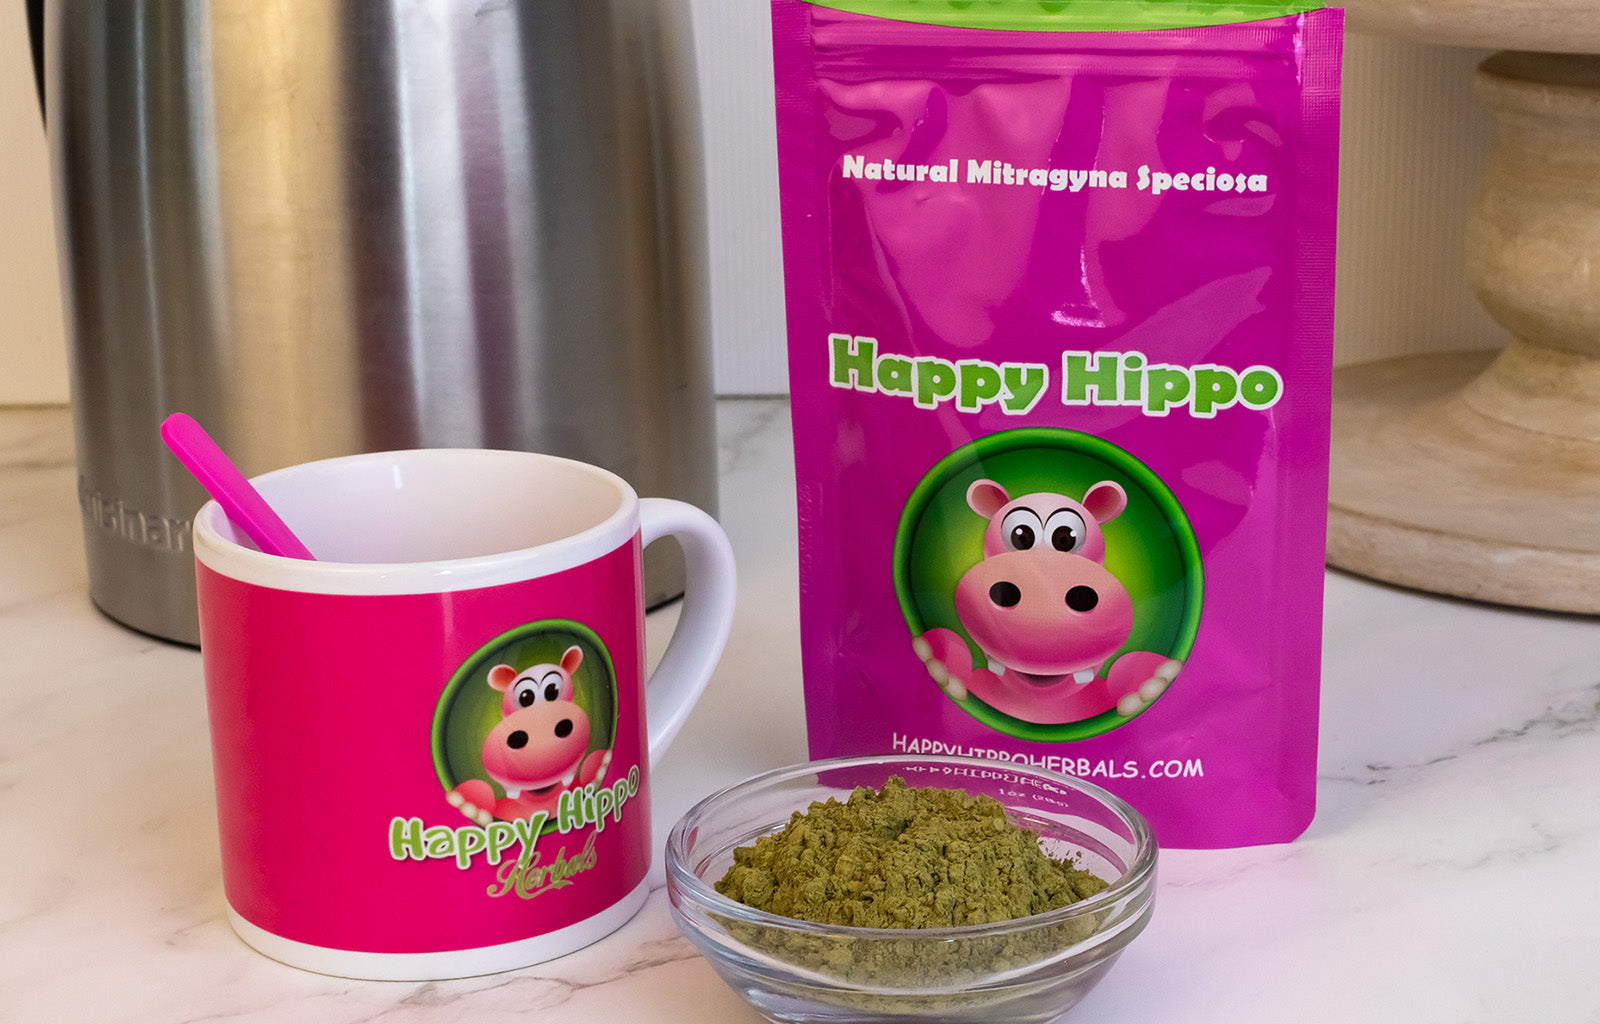 Featured image depicting a small glass ramekin containing loose kratom powder, next to which sits a tea cup, and a 1oz packet of Happy Hippo branded green maeng da kratom powder